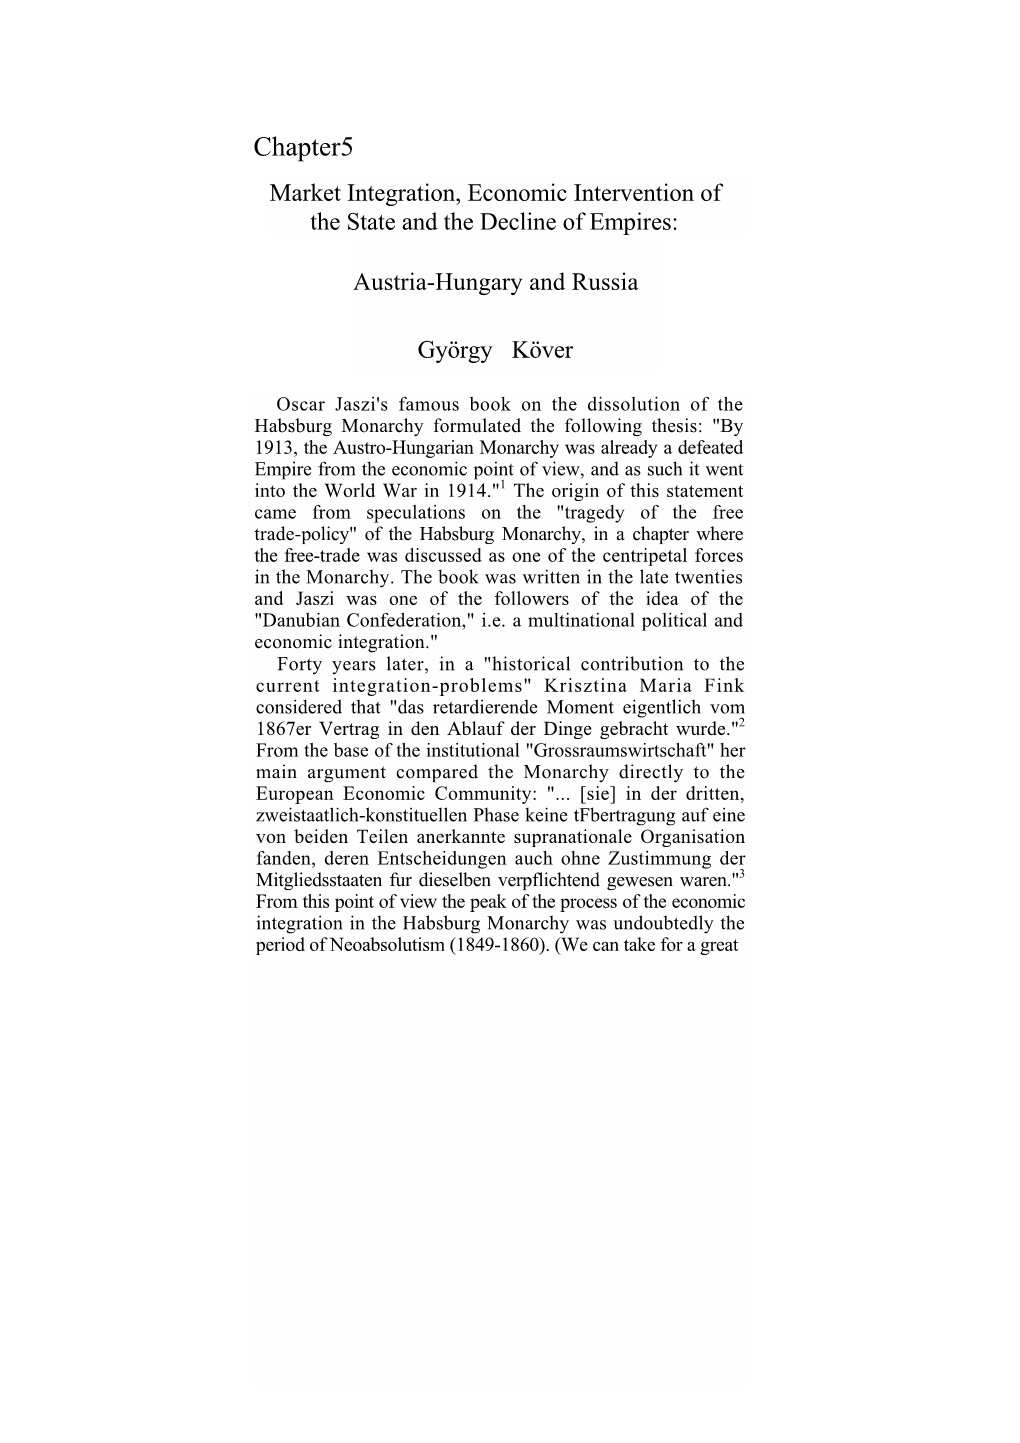 Chapter5 Market Integration, Economic Intervention of the State and the Decline of Empires